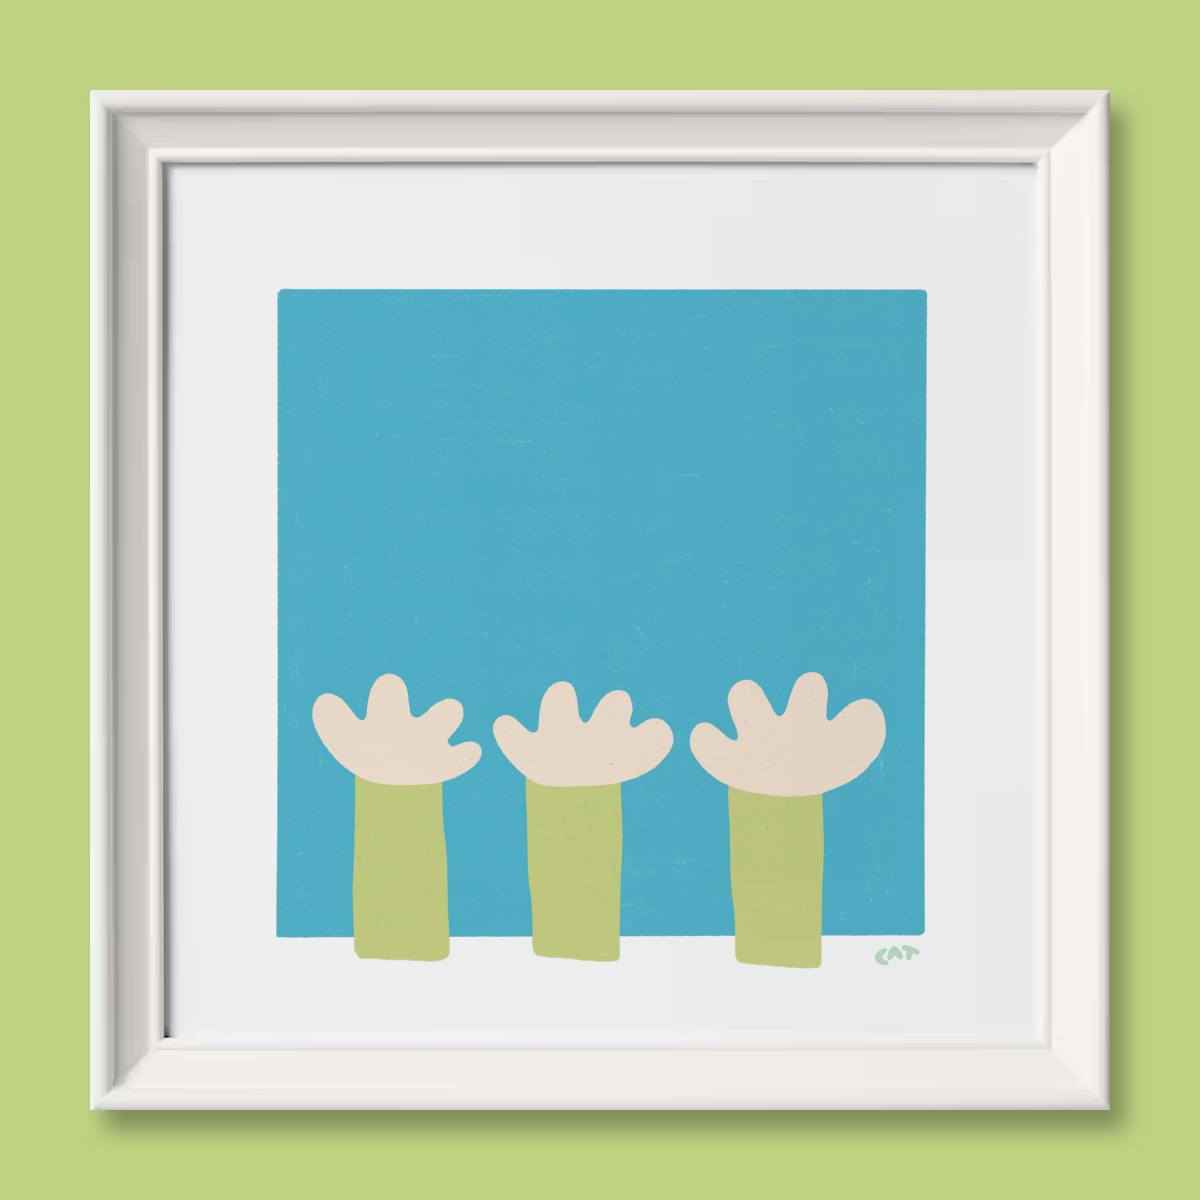 White framed print of a blue square with green garden hose shapes on top of the square.